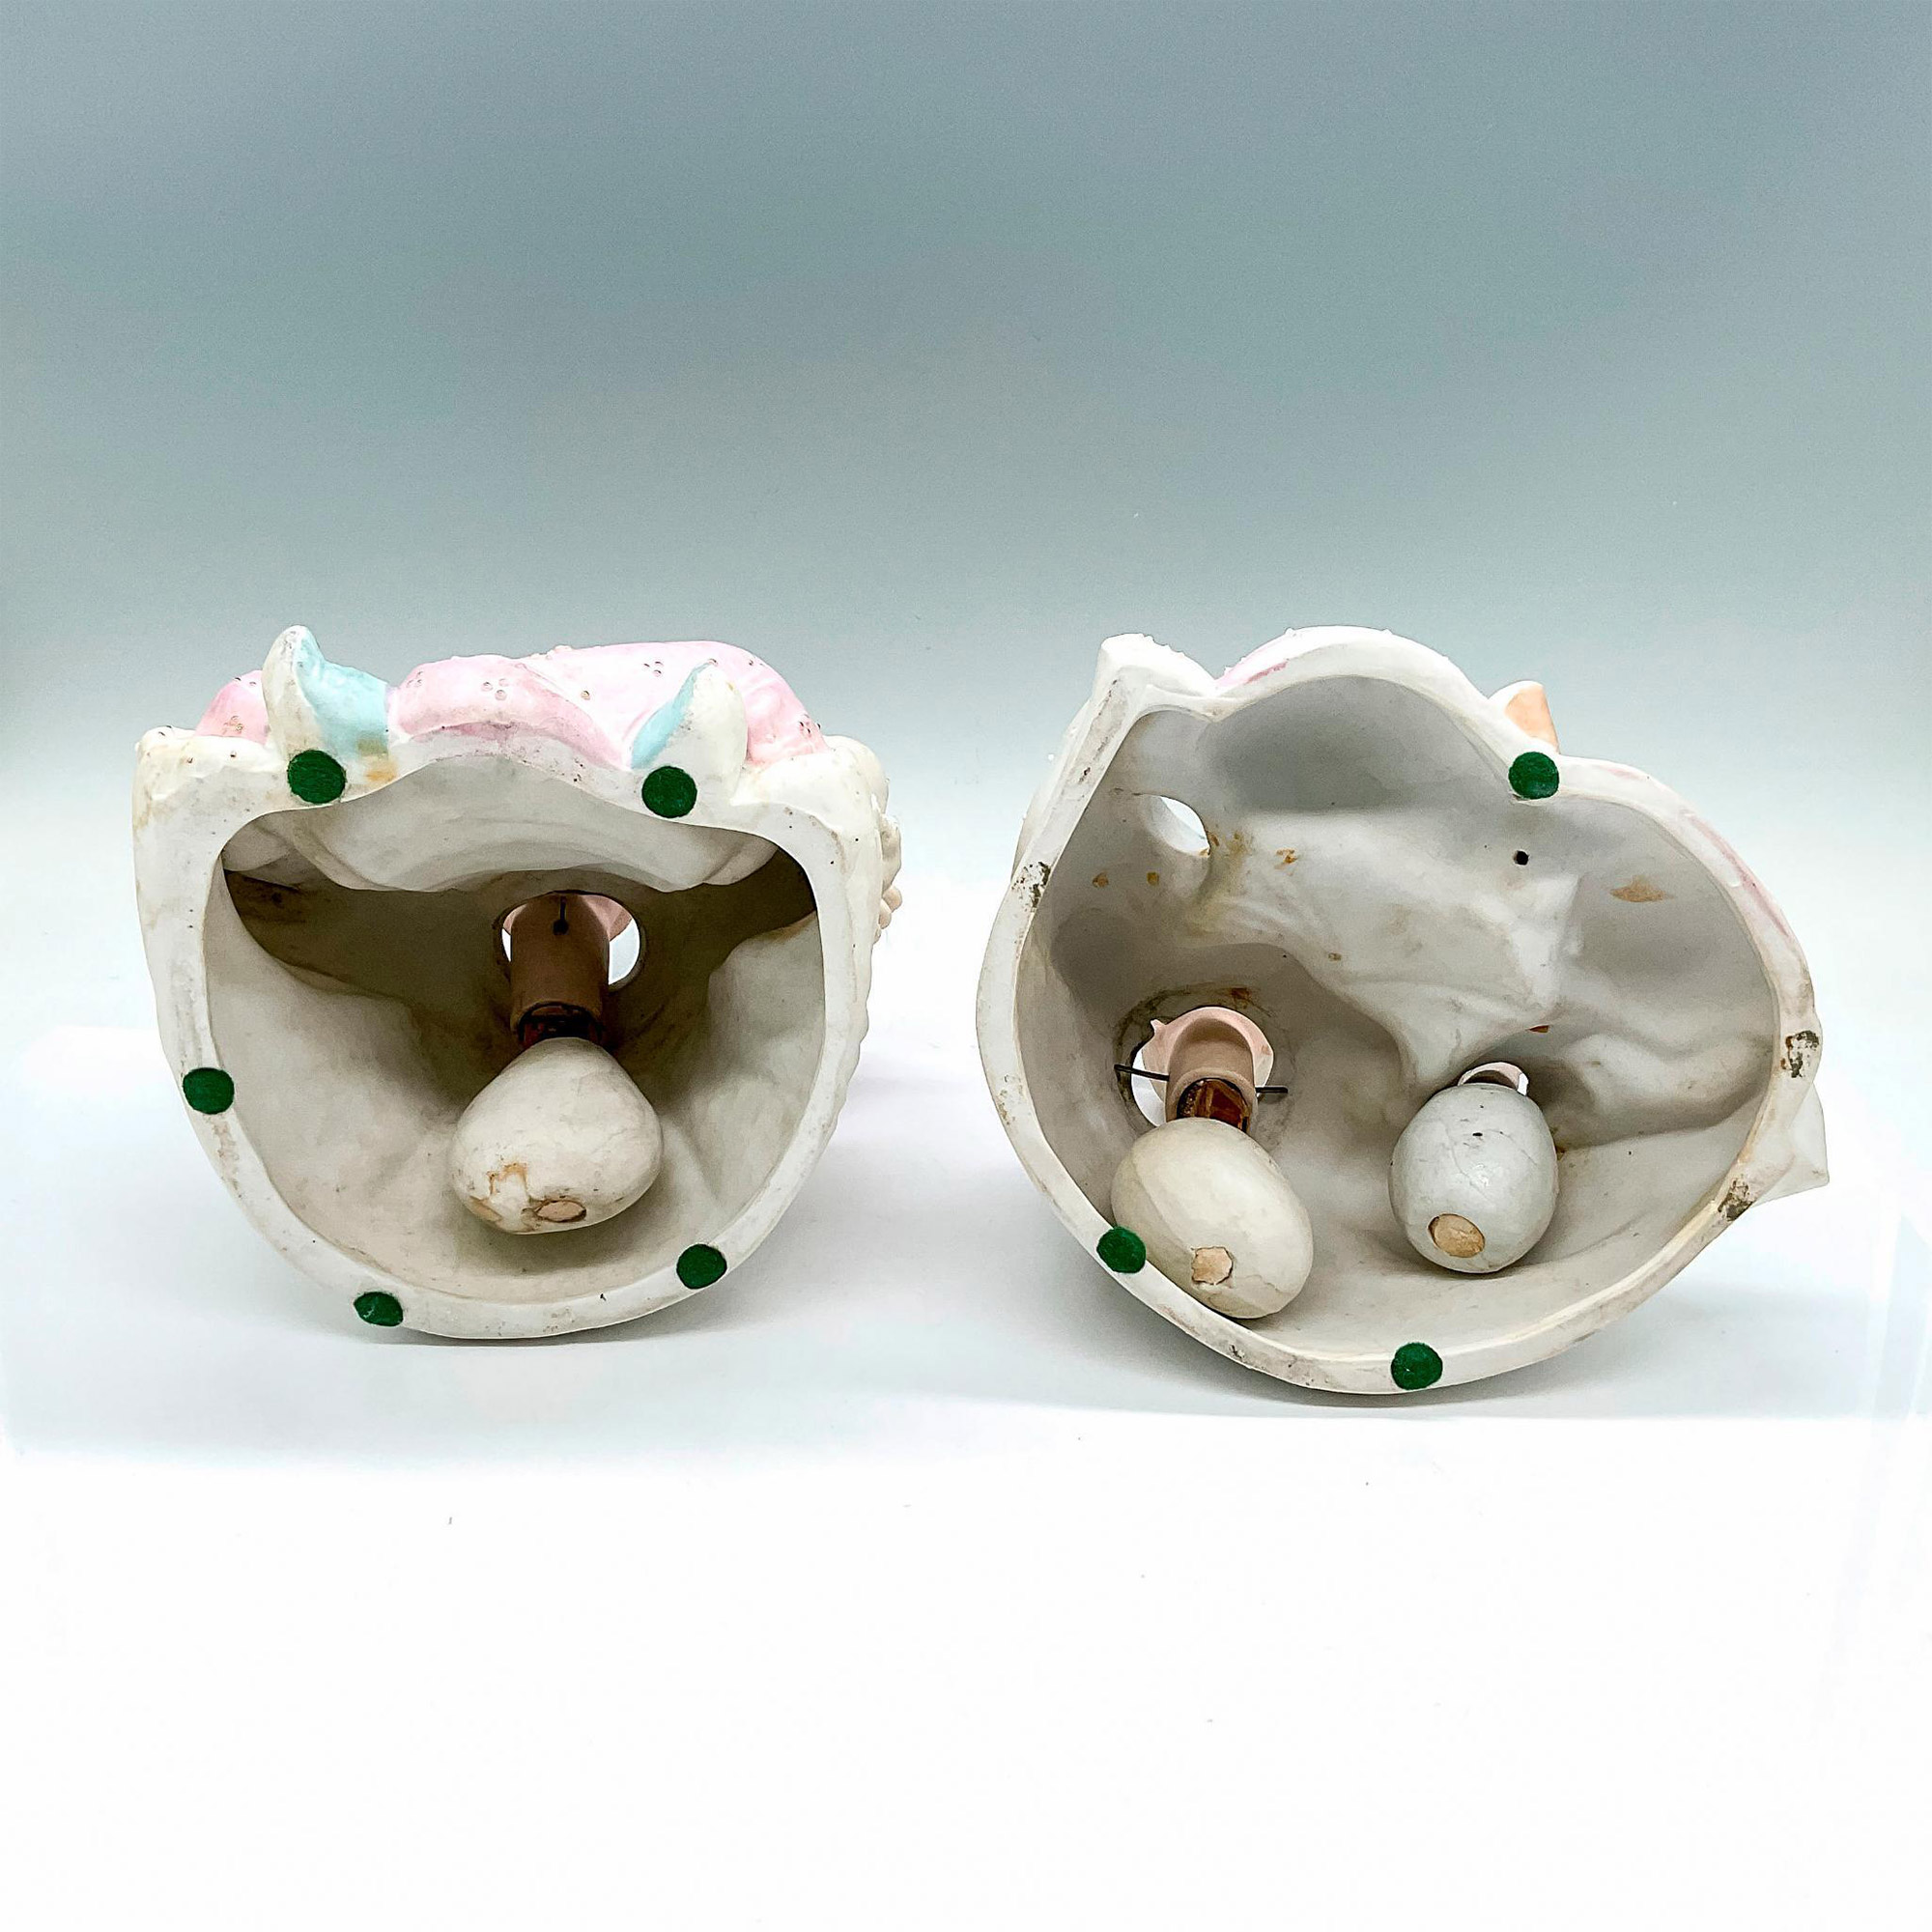 Pair of Porcelain Asian Nodder Head Figurines - Image 3 of 3